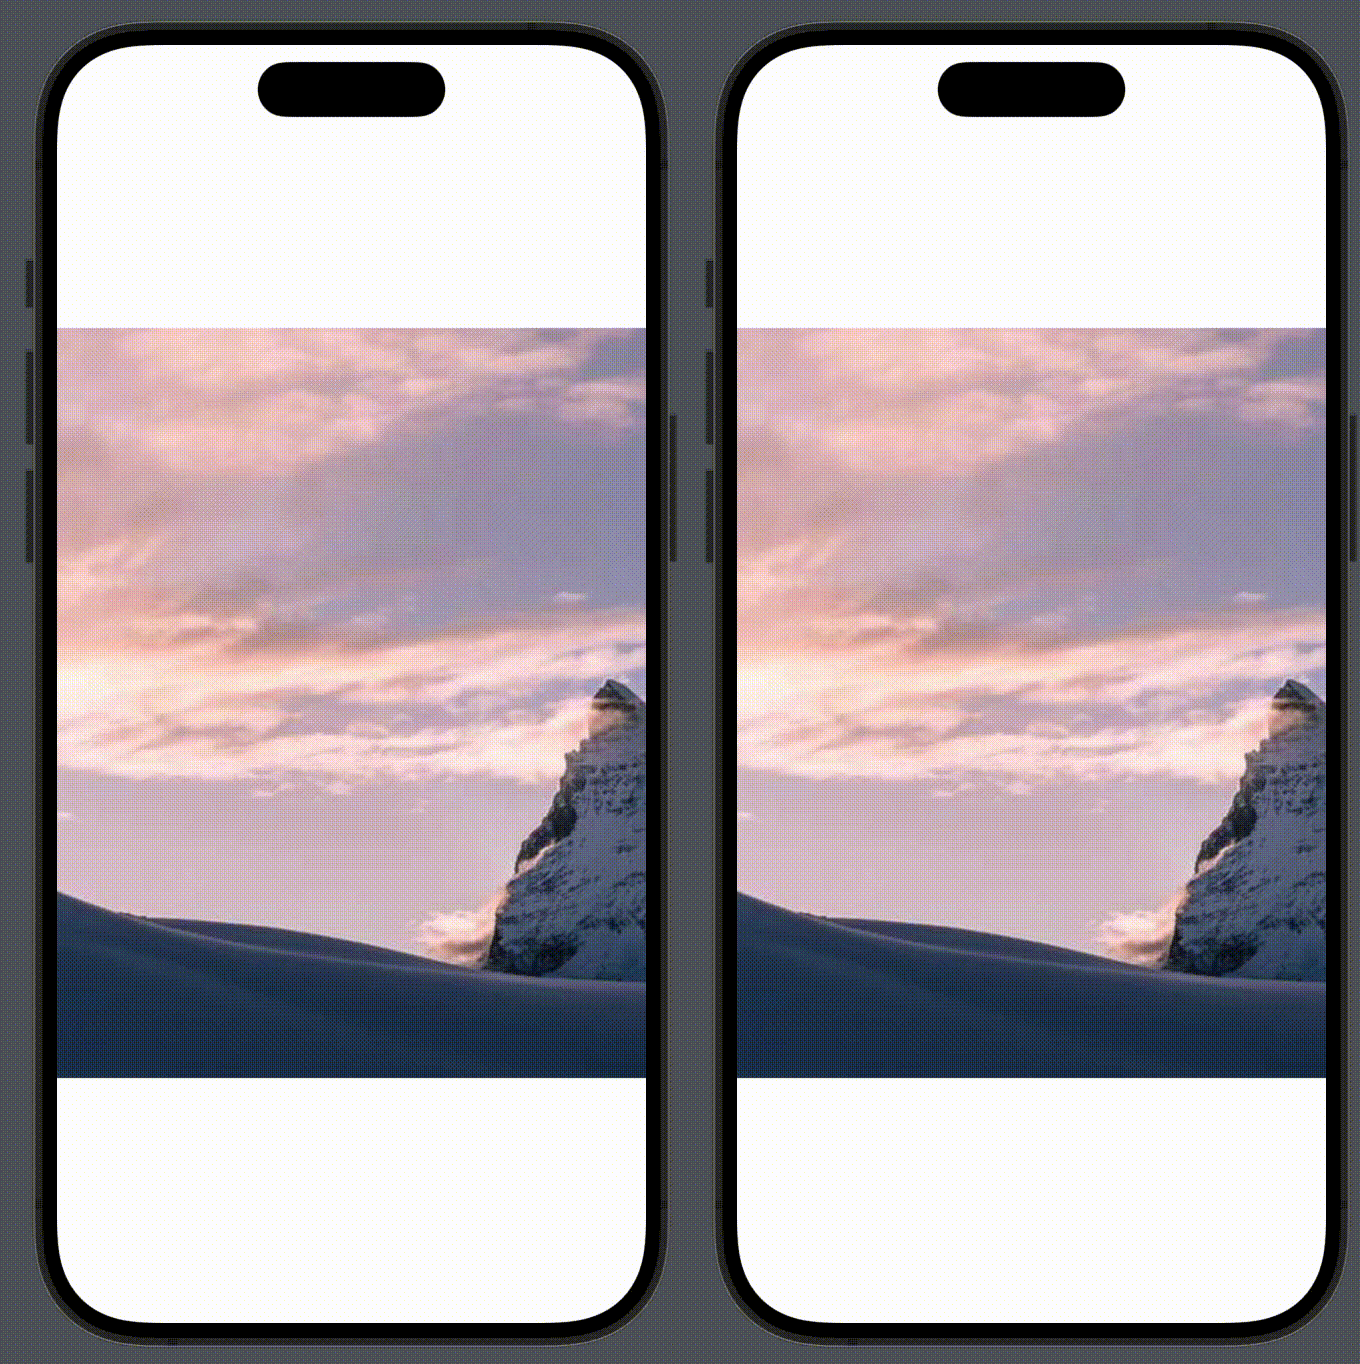 A gif image showing the problems with the Drag and Magnification Gesture on the image in the simulator. On the left simulator, the image is dragged from the right to the left. When the gesture is made more close to the border of the simulator frame, the image jumps instead of slides. On the right simulator, the image is scaled from the center to the border and afterwards it is scaled from the border to the center. The last gesture makes the image pop in the screen in the new scale.